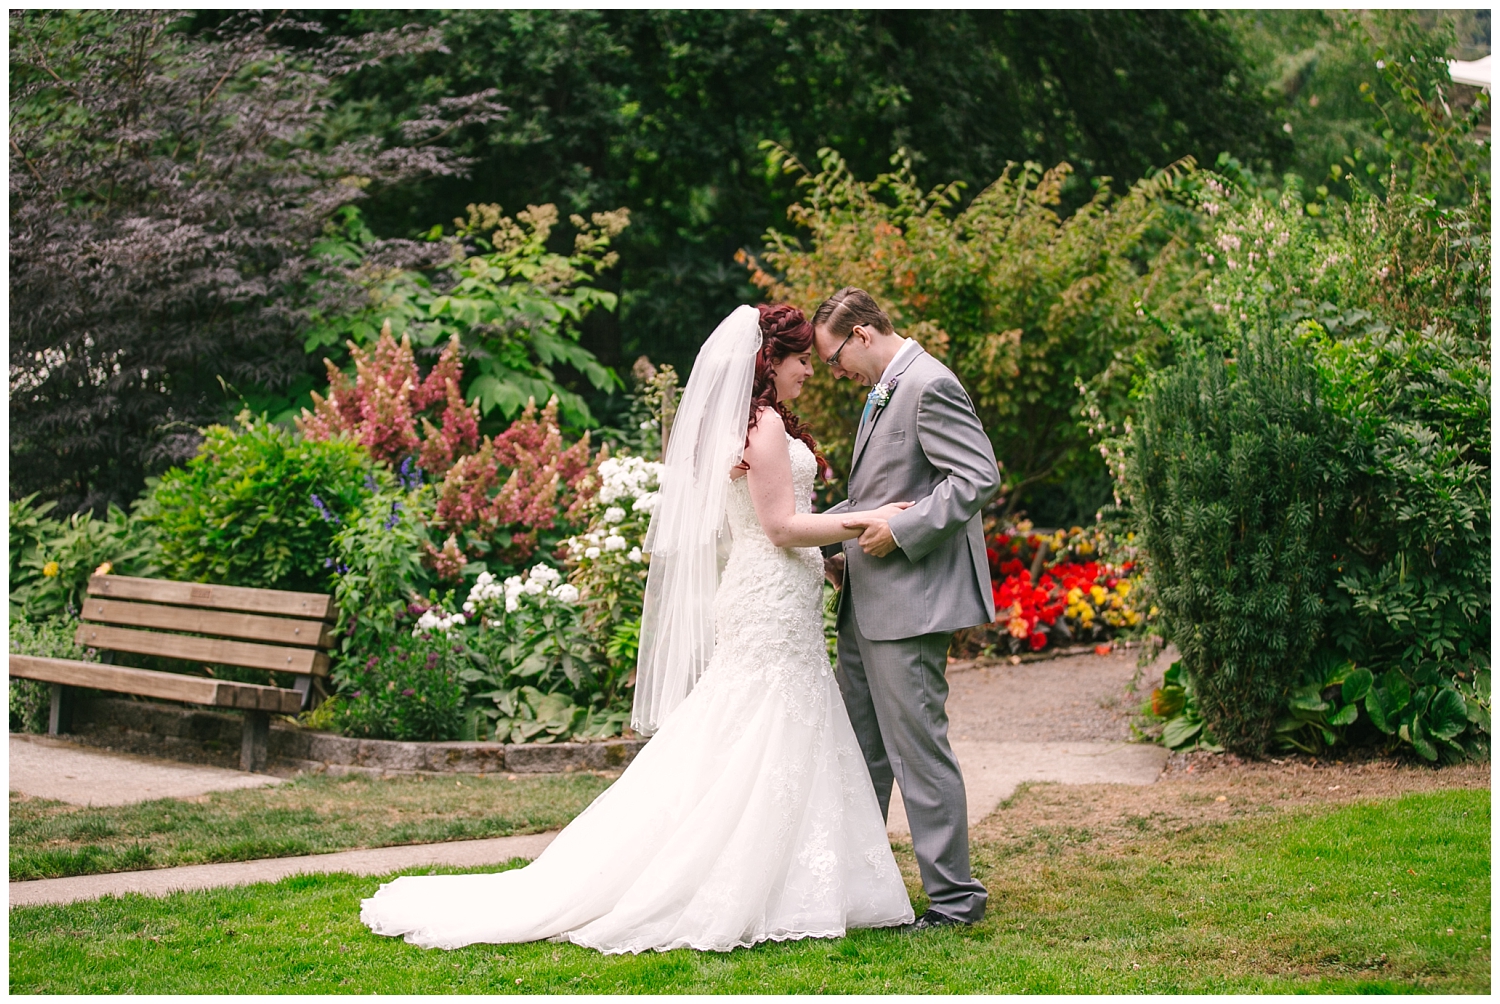 Bride and Groom First Look at Point Defiance Park Rose Garden in Tacoma, WA